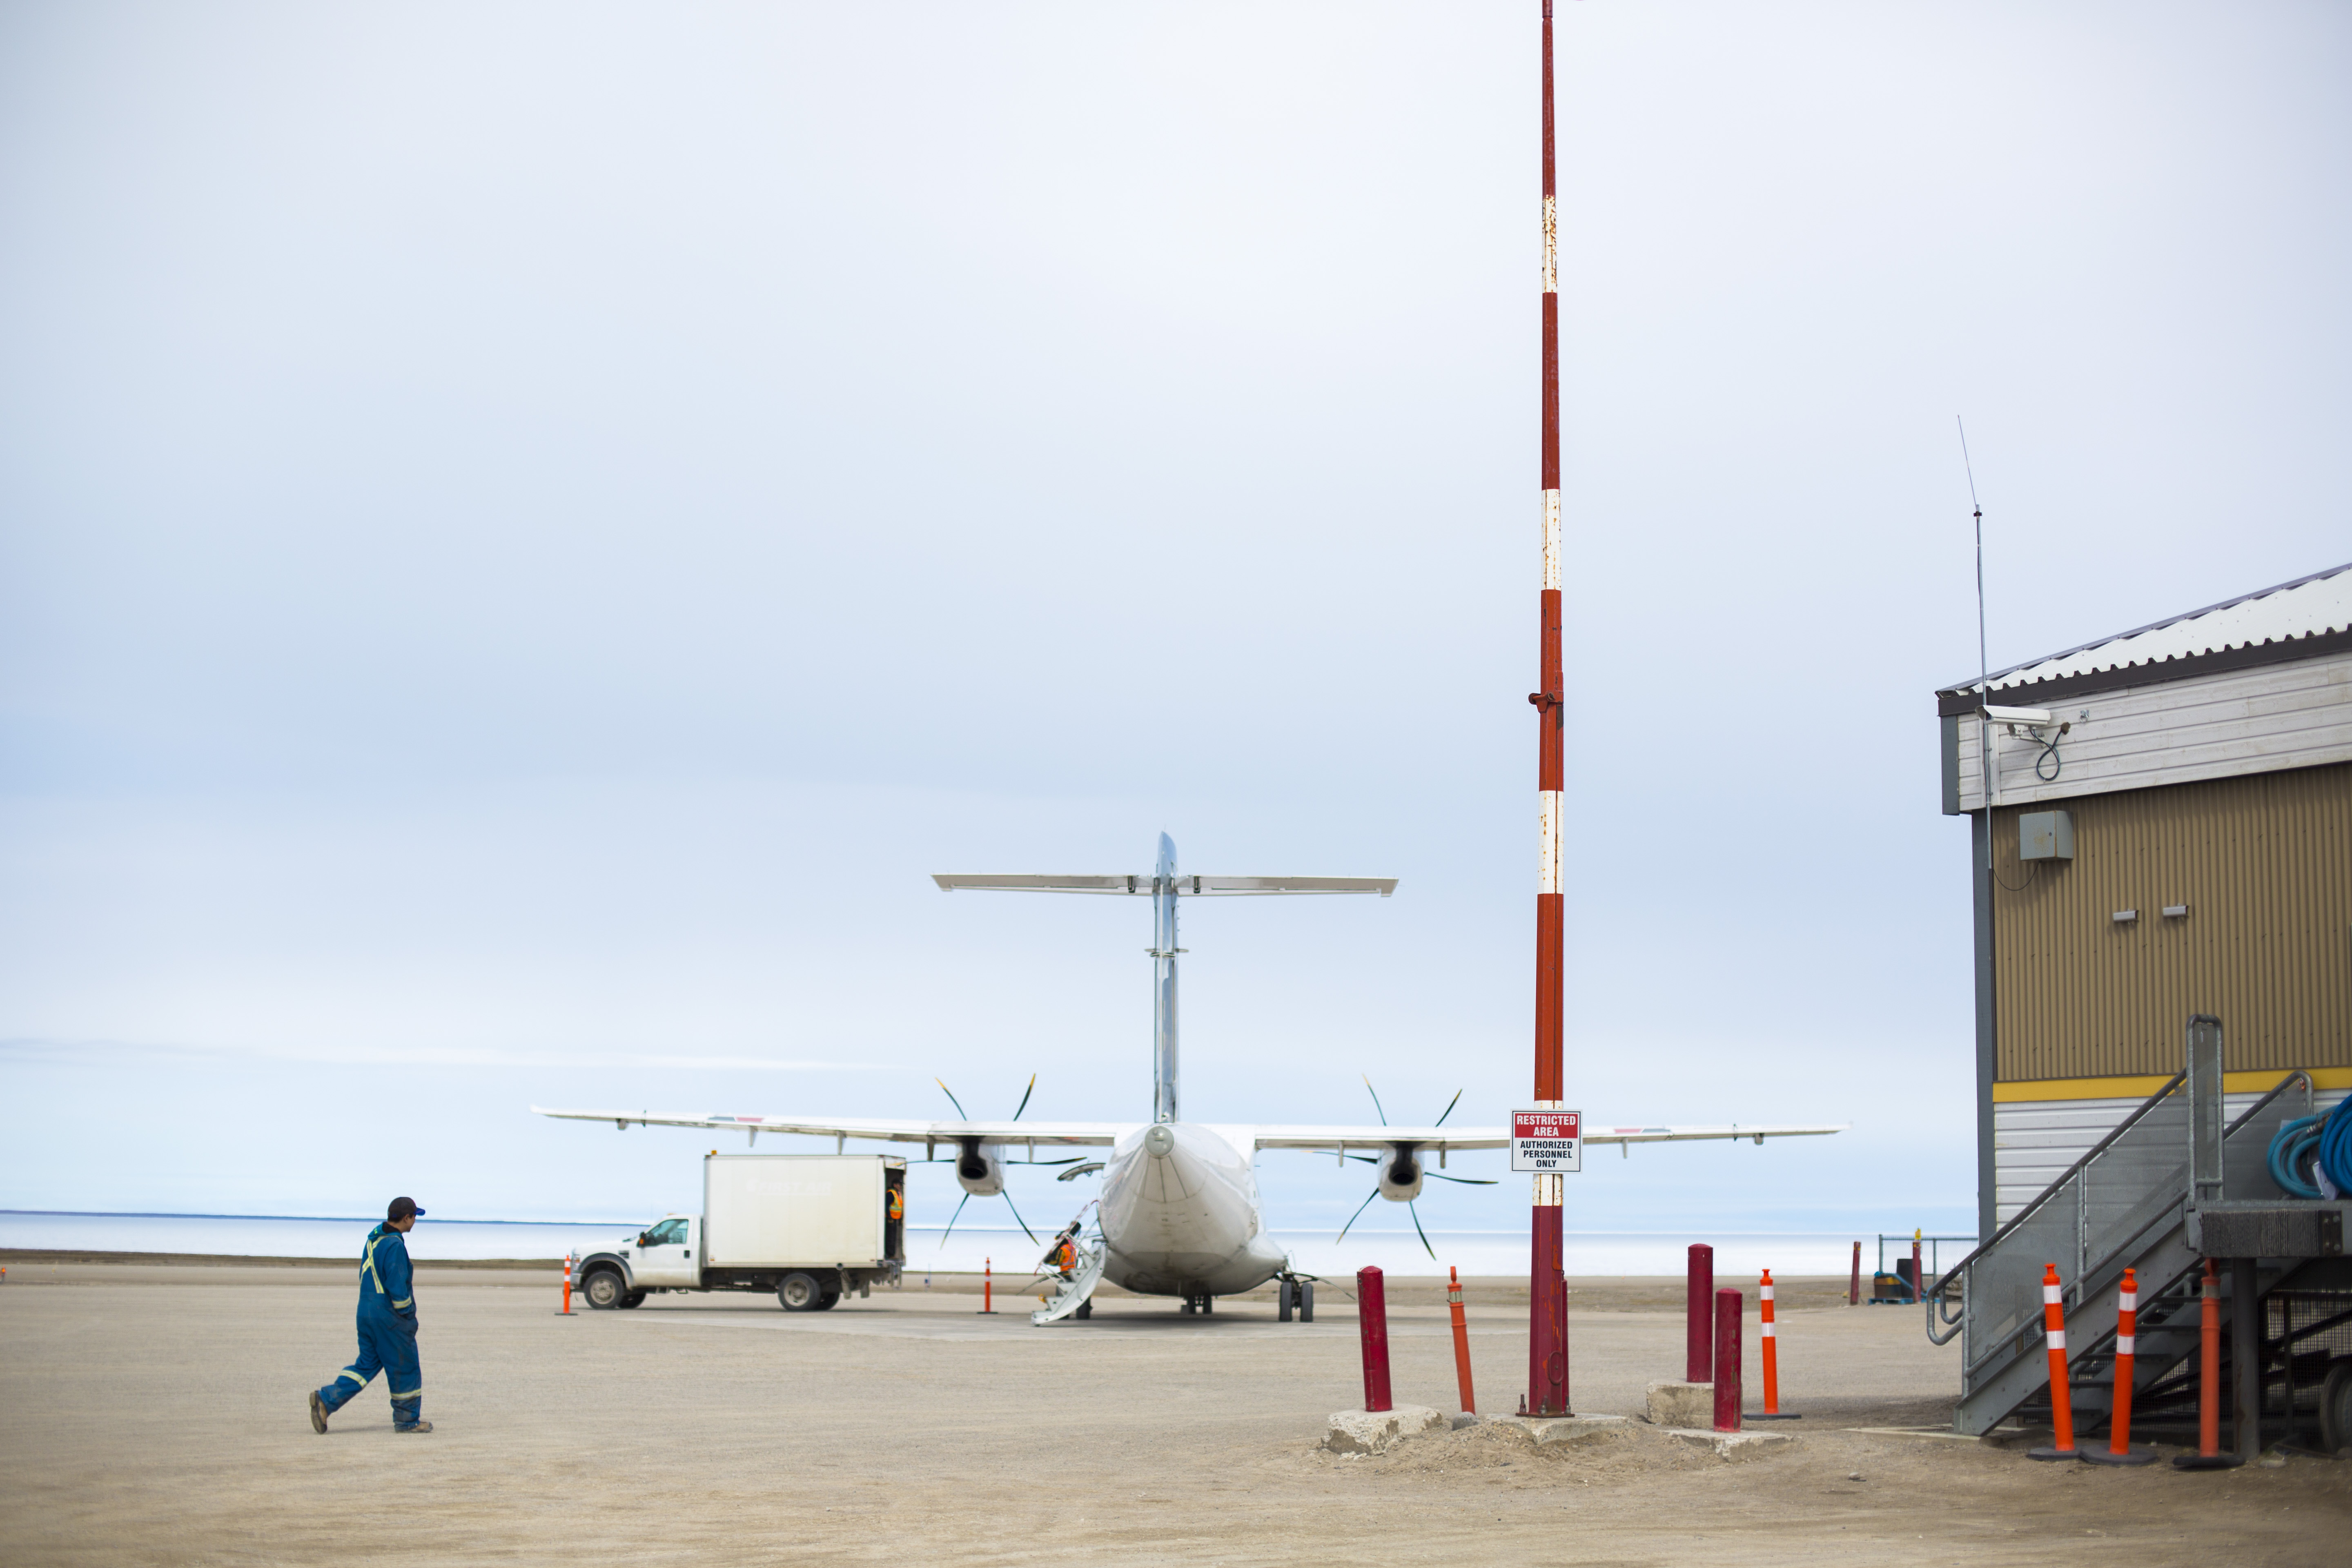 A plane prepares for takeoff at the Gjoa Haven airport.